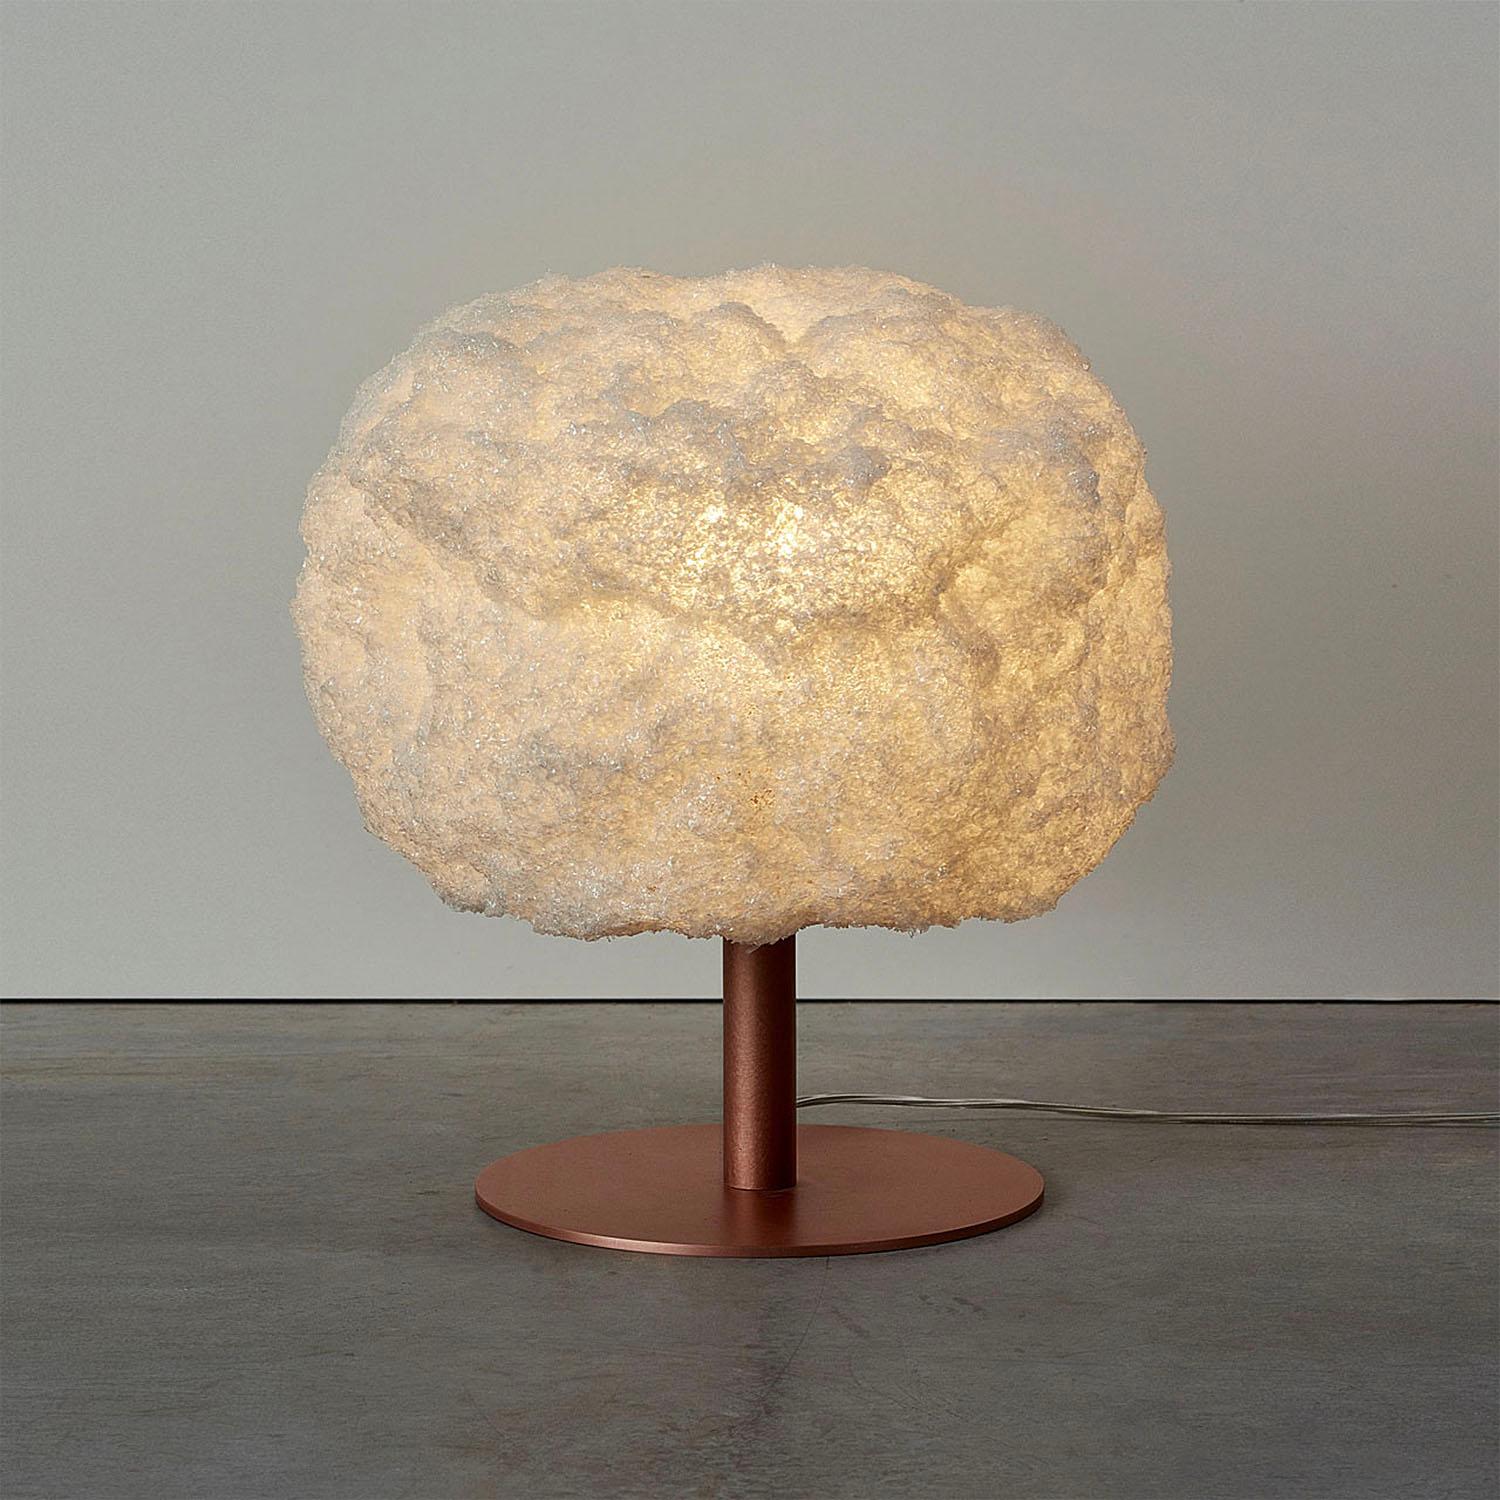 Contemporary off-white table lamp - storm light copper by Johannes Hemann.
Material: polycarbonate, copper
Dimensions: Ø 38 x H 45 cm
Material options: white, grey, blue

The Storm Series is by its concept the purest example of a process-design,